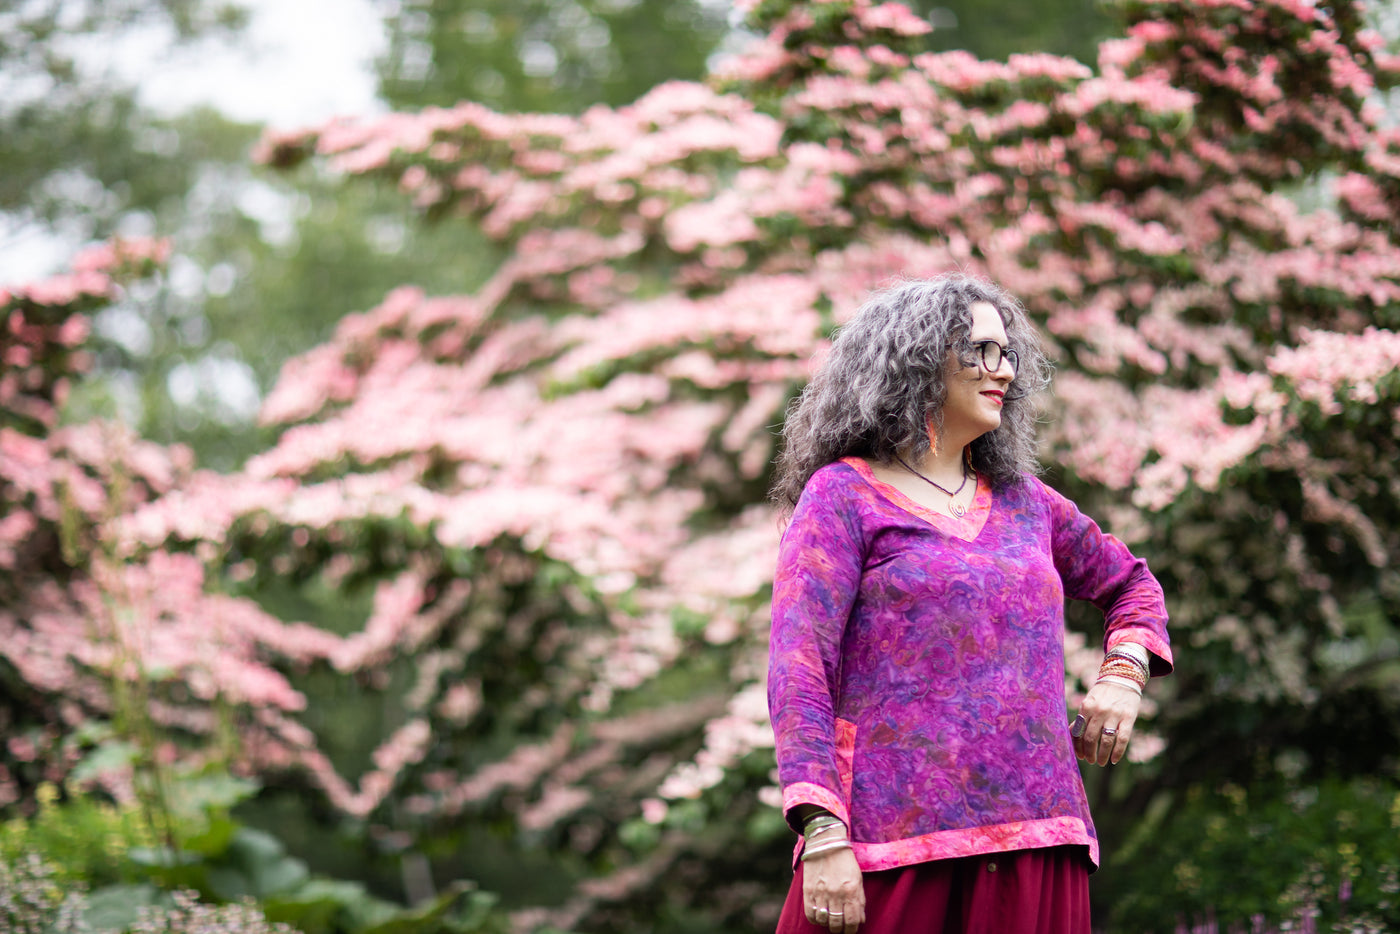 beautiful curly haired woman with graying hair and glasses wearing a bright purple two tone batik tunic in front of a flowering pink dogwood tree